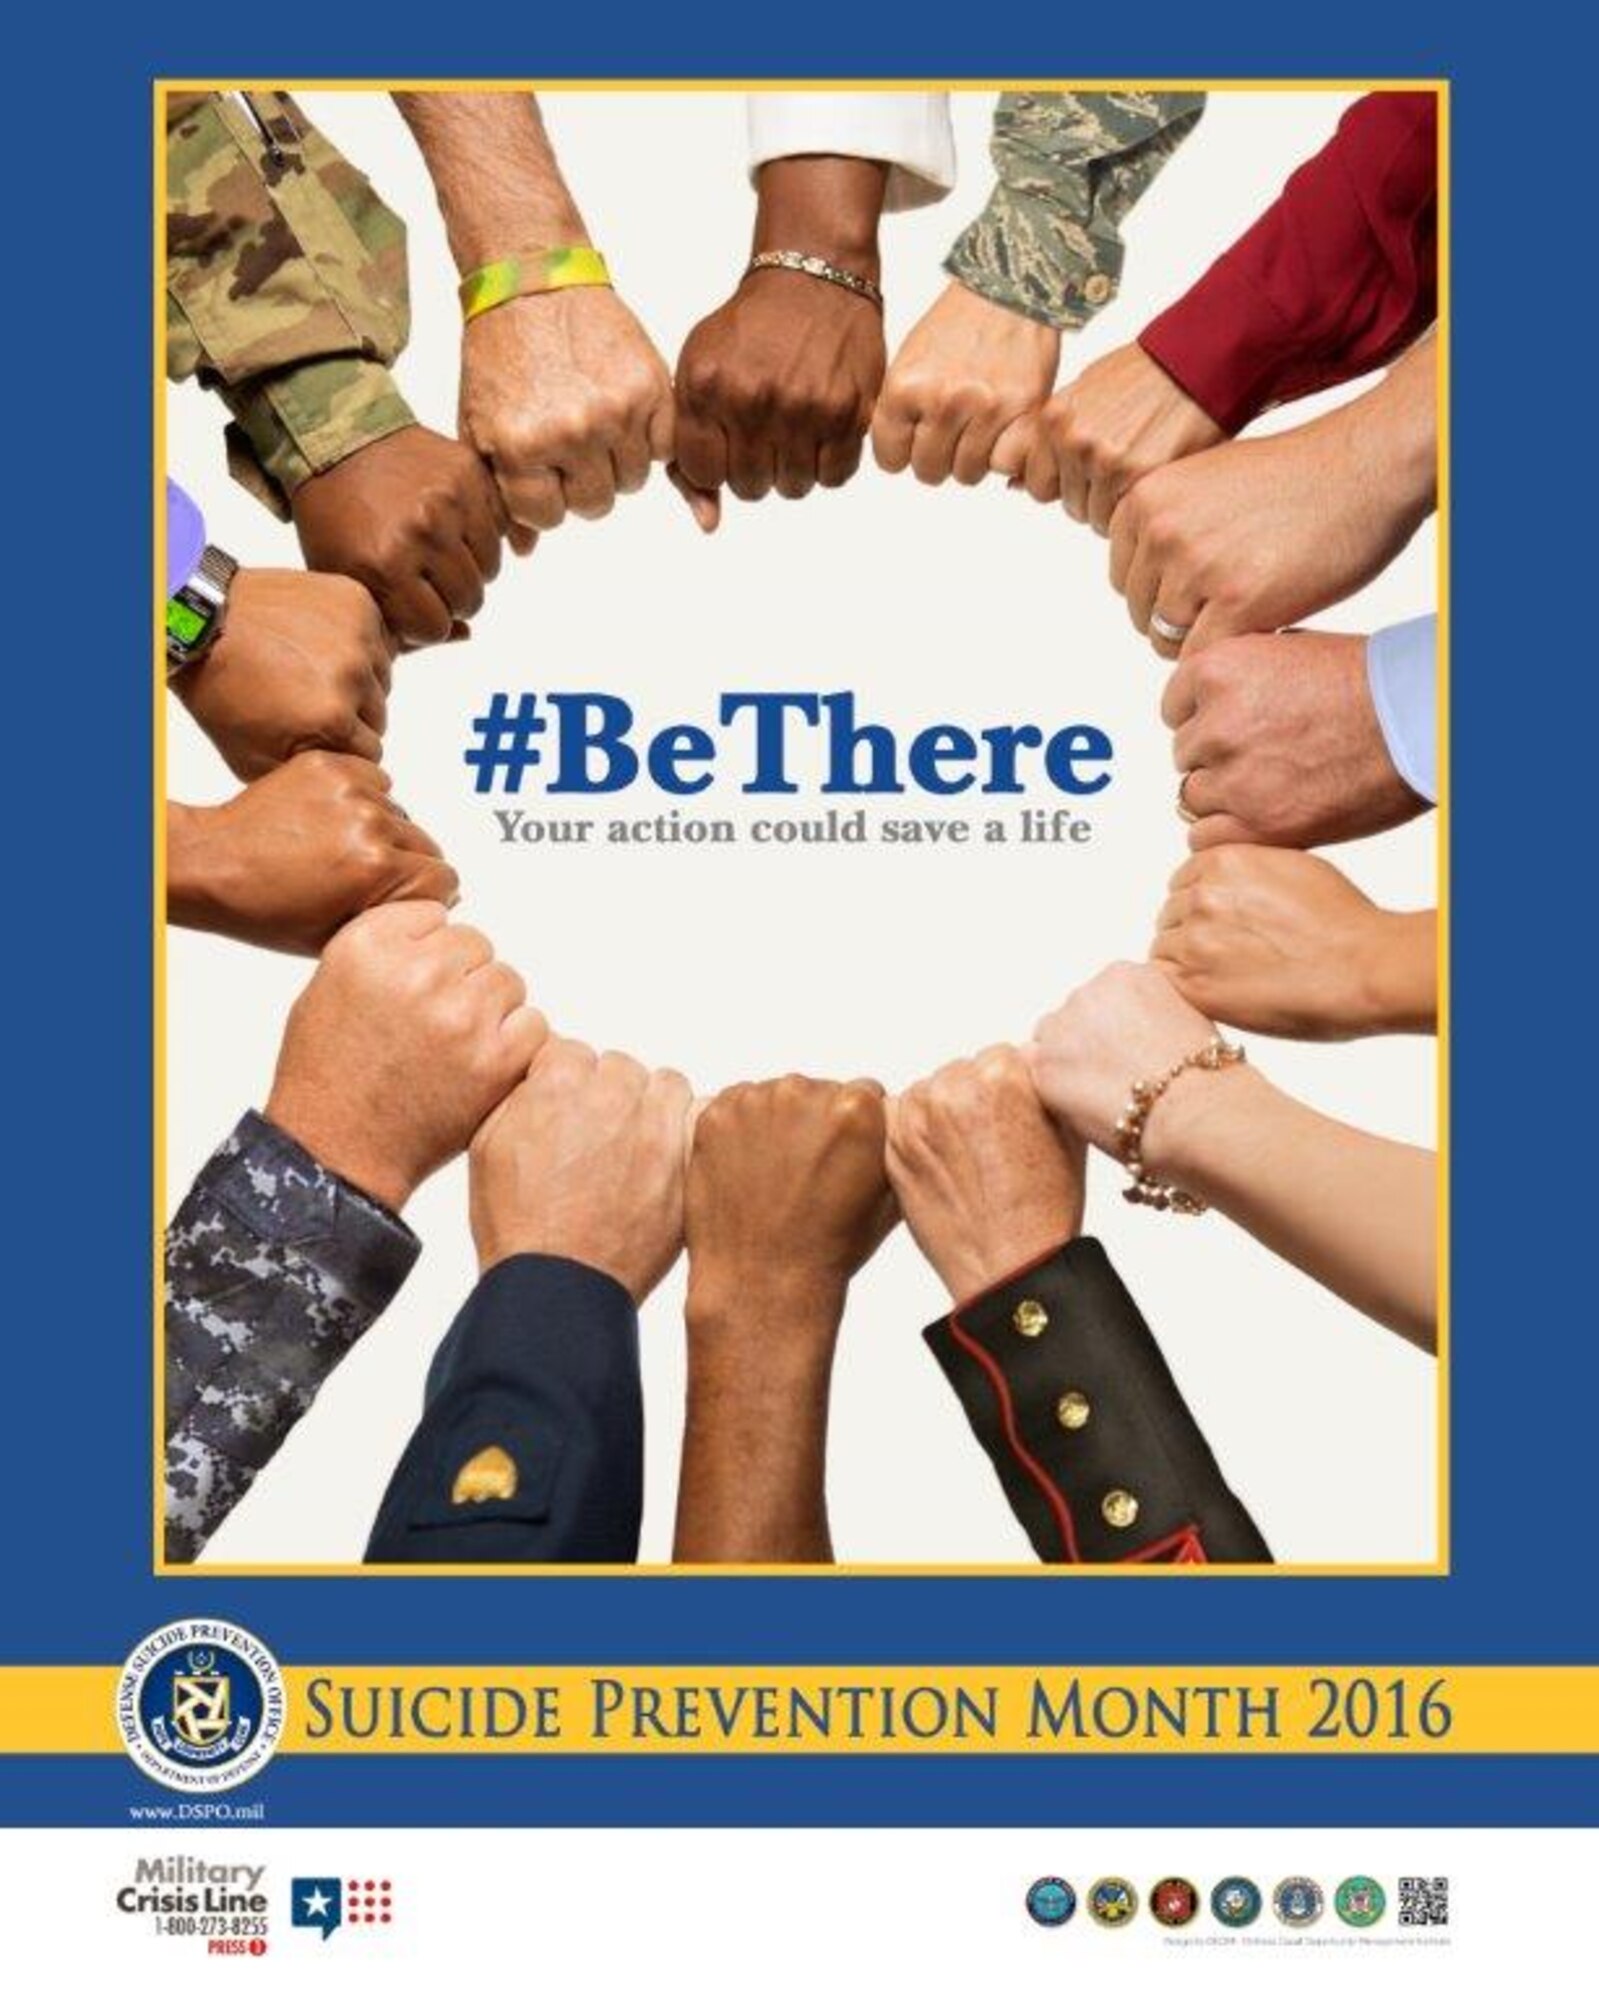 #Be There
Your action could save a life.
Suicide Prevention Month 2016